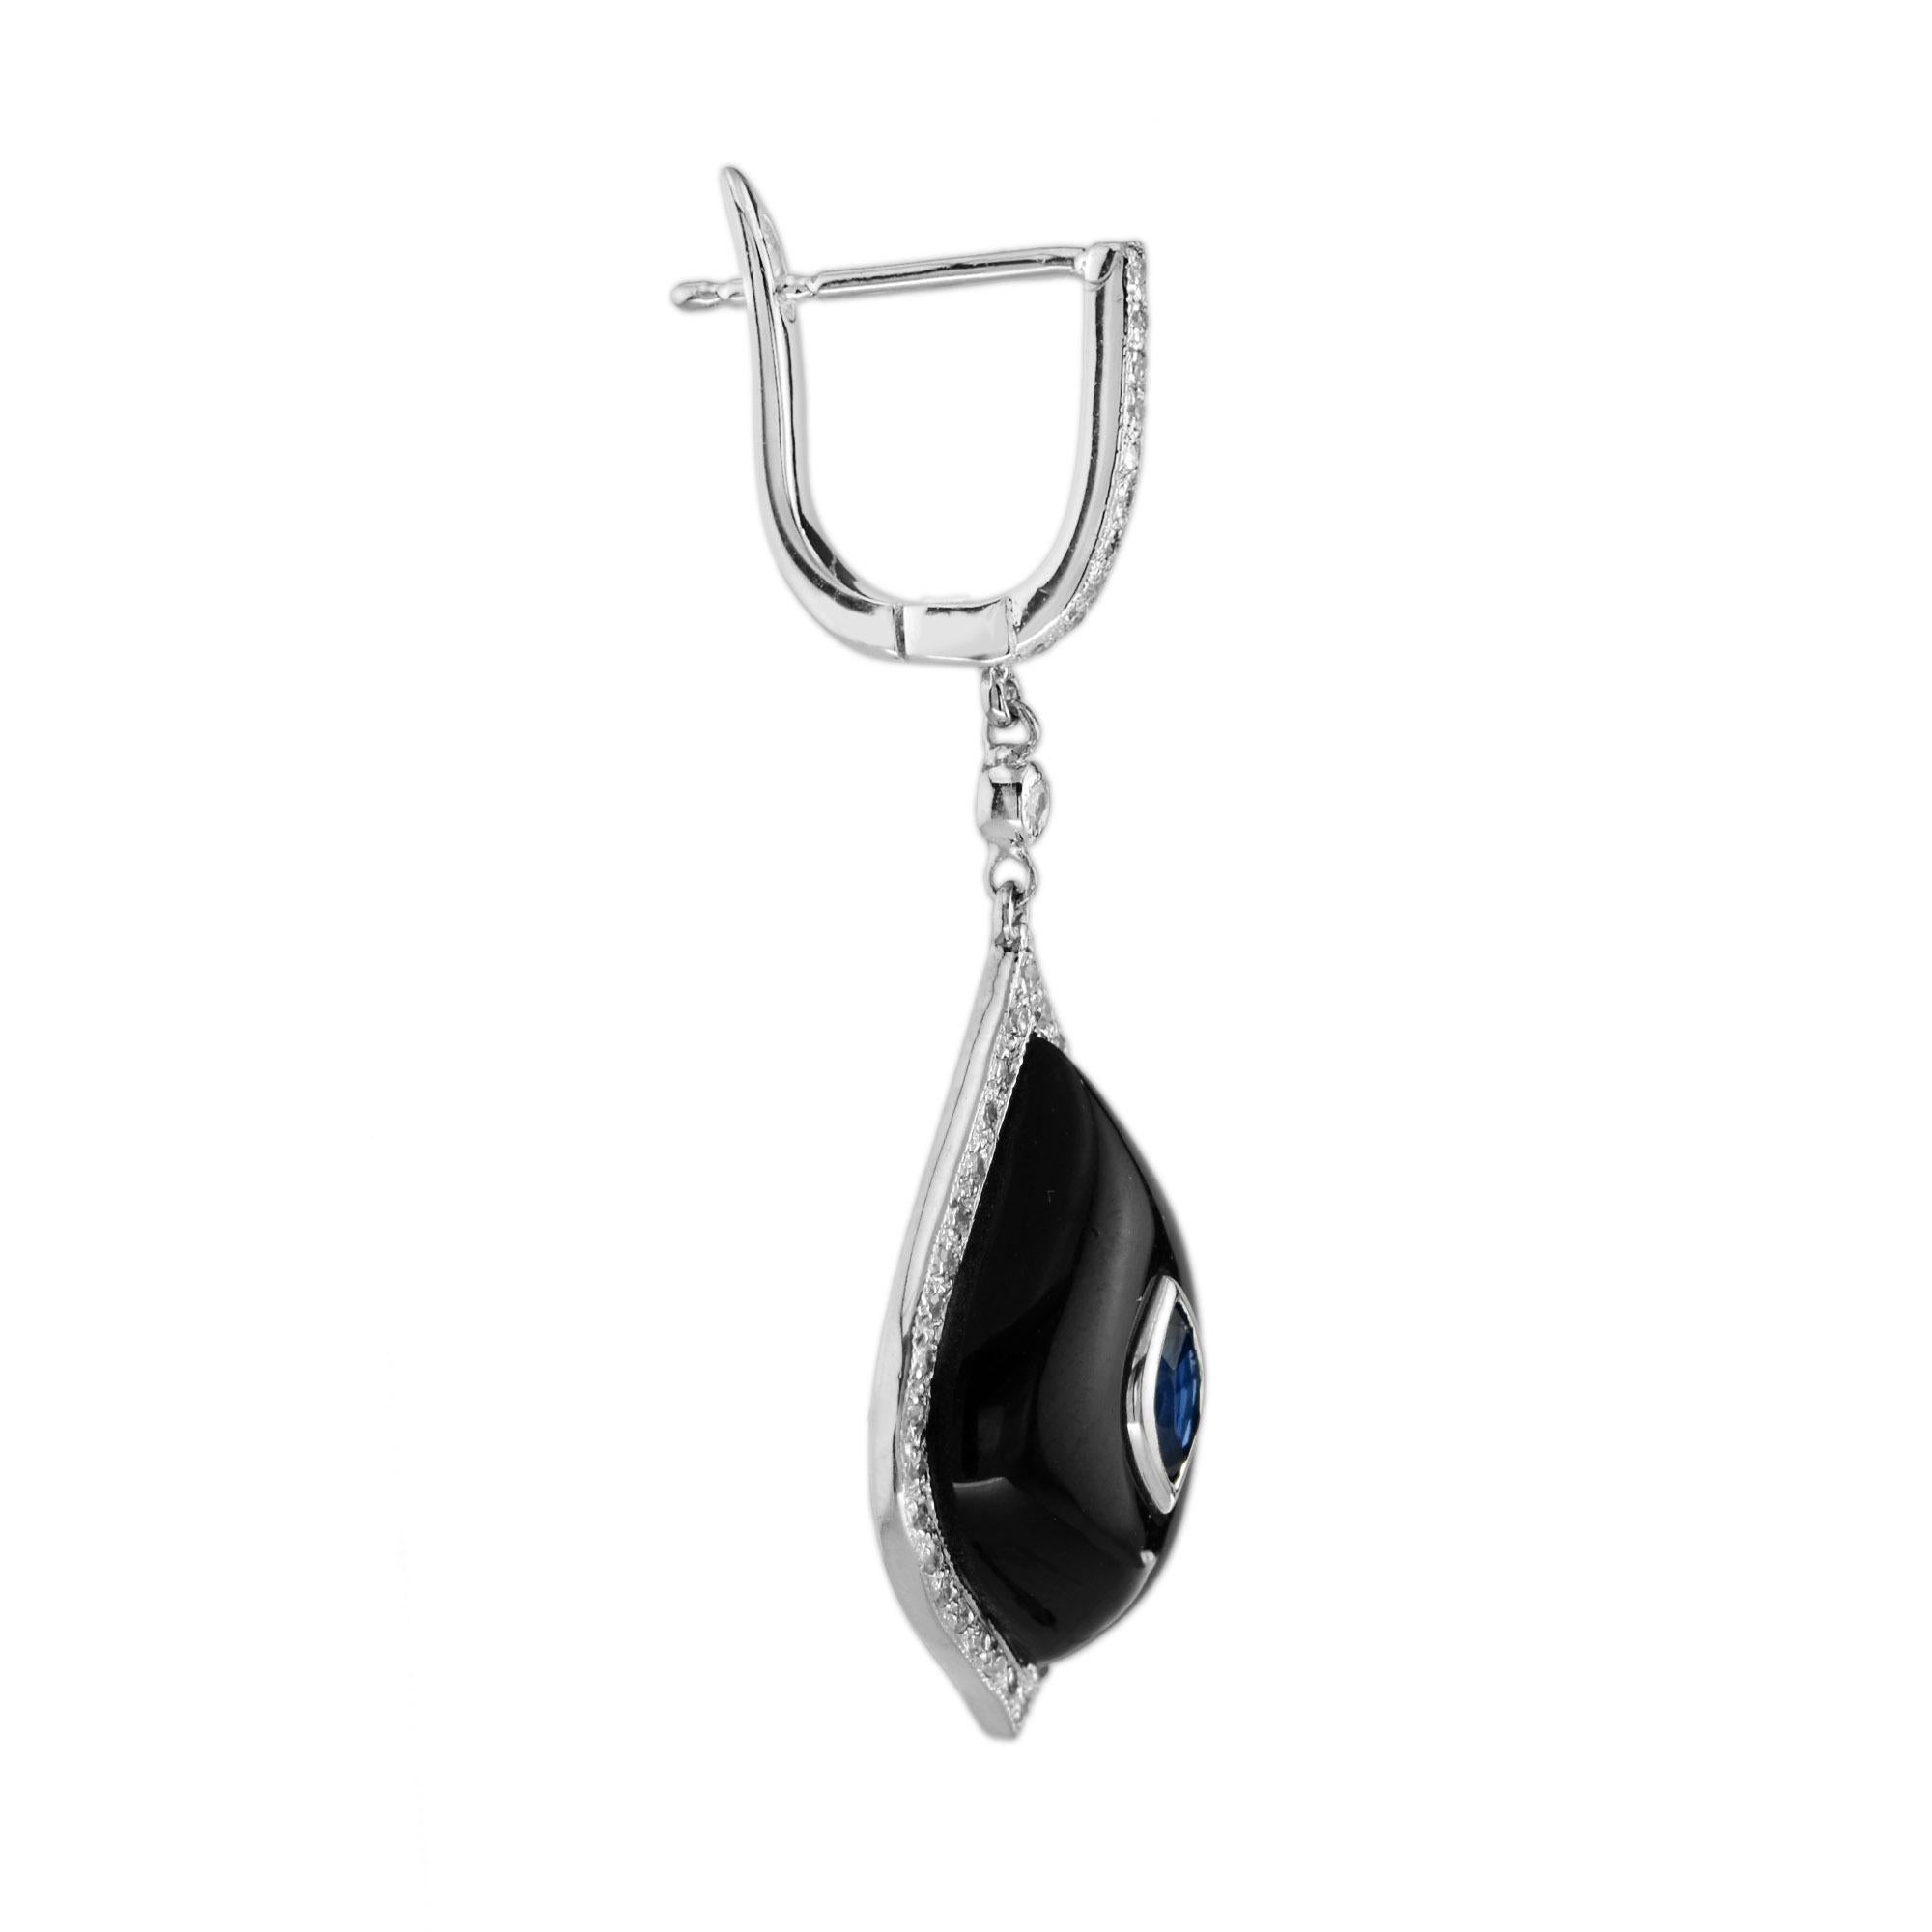 This simplicity of the black onyx together with sapphire and diamond works so well. The earrings made in 14k white gold with a center blue sapphire. The shiny black onyx surrounds the sapphire and forms marquise shape. There are 47 diamonds halo on